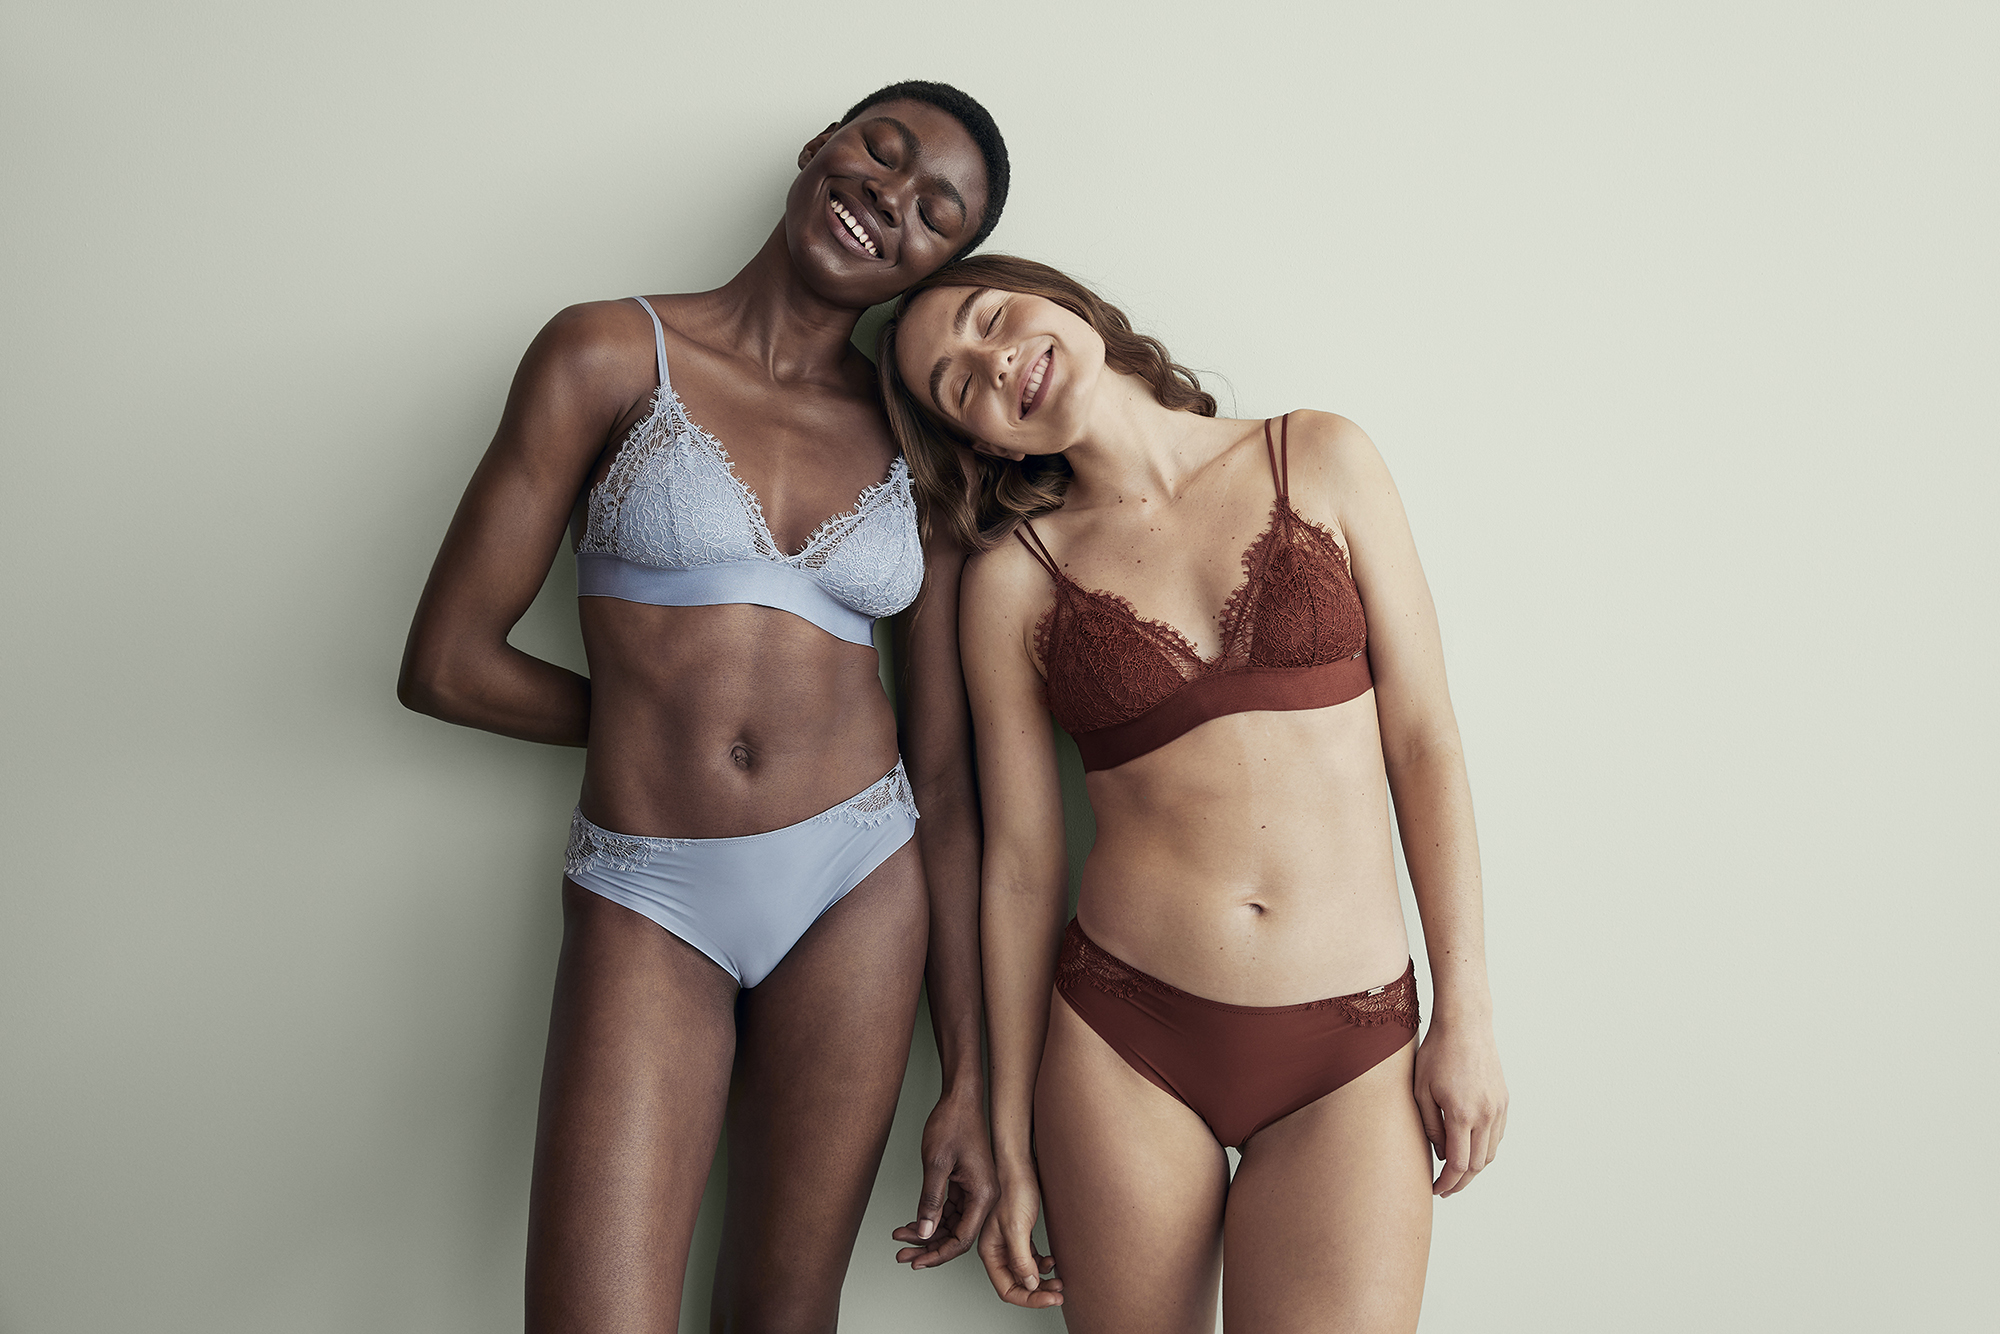 Lindex celebrates women's differences in this spring's underwear